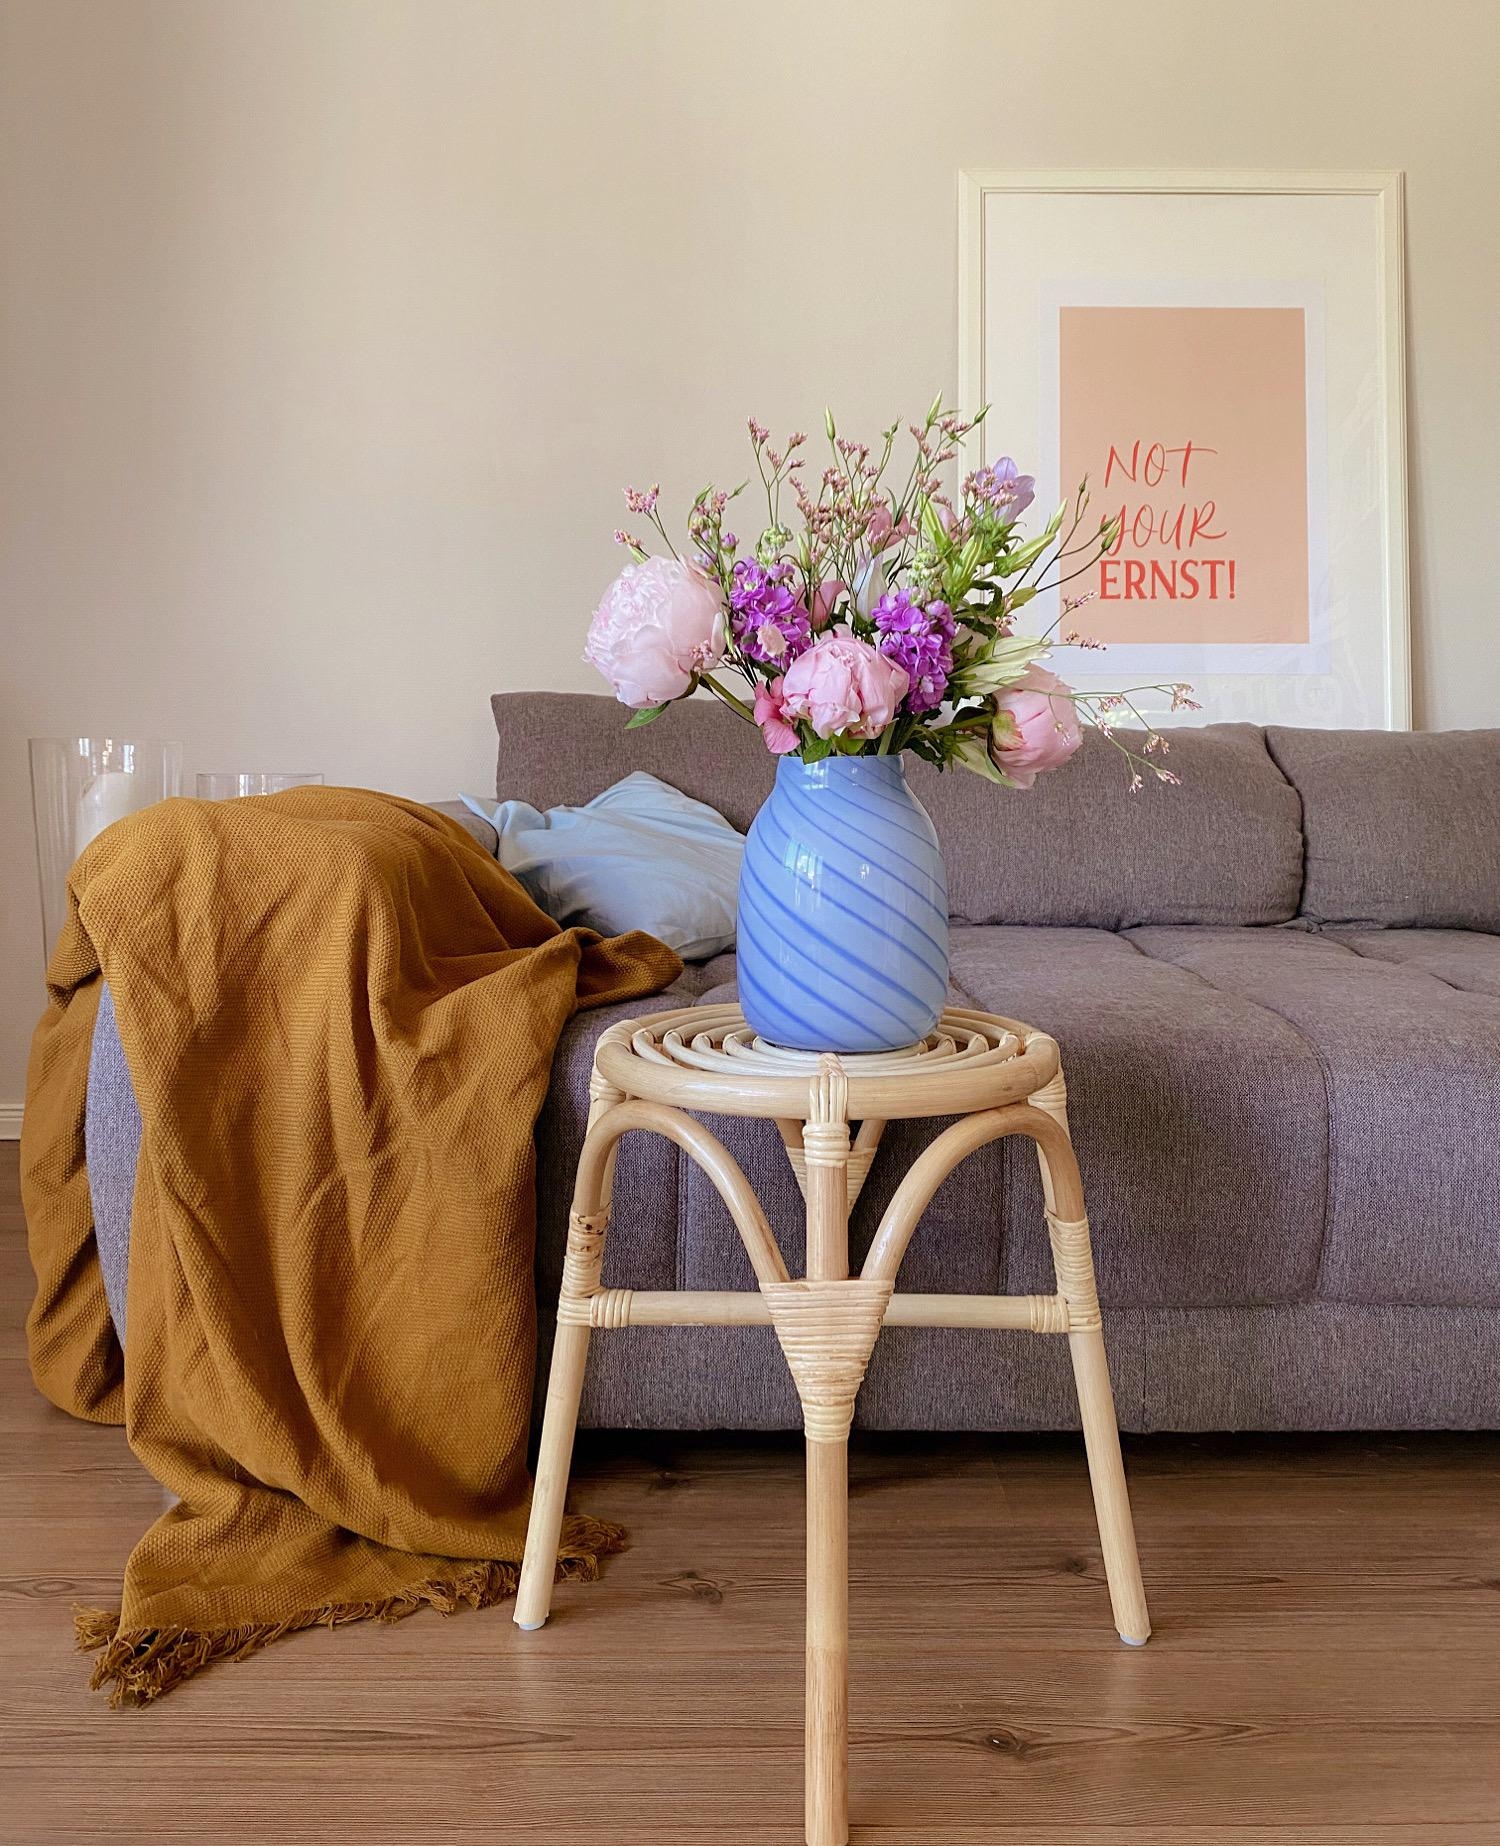 #flowerbouqet#livingroom#hyggehome#vasenliebe#peonies#karlaundkurt#couchstyle#colourfulhome